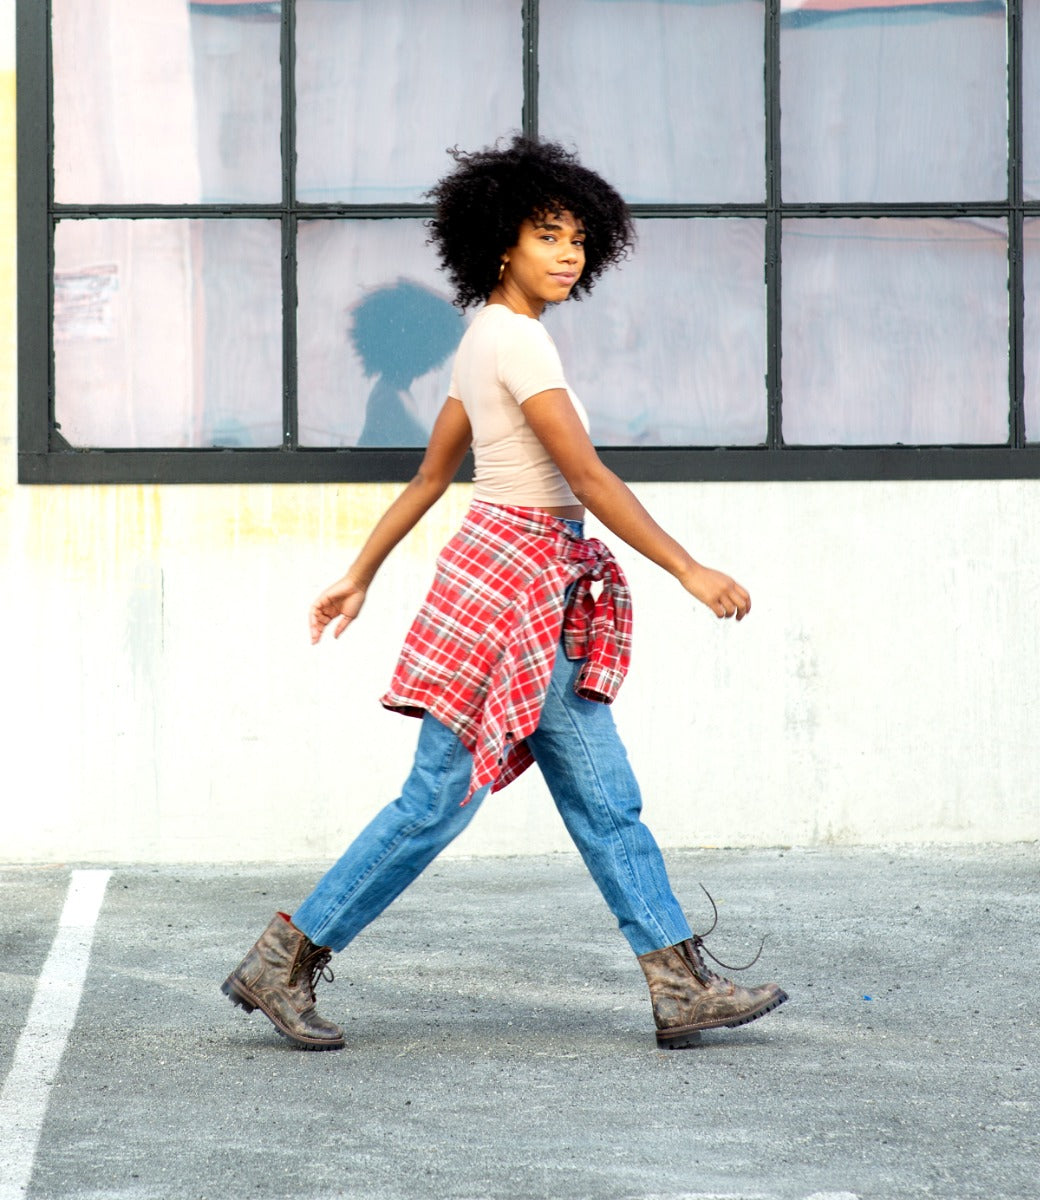 A woman walking in a parking lot wearing Bed Stu's Tactic Trek plaid shirt and jeans.